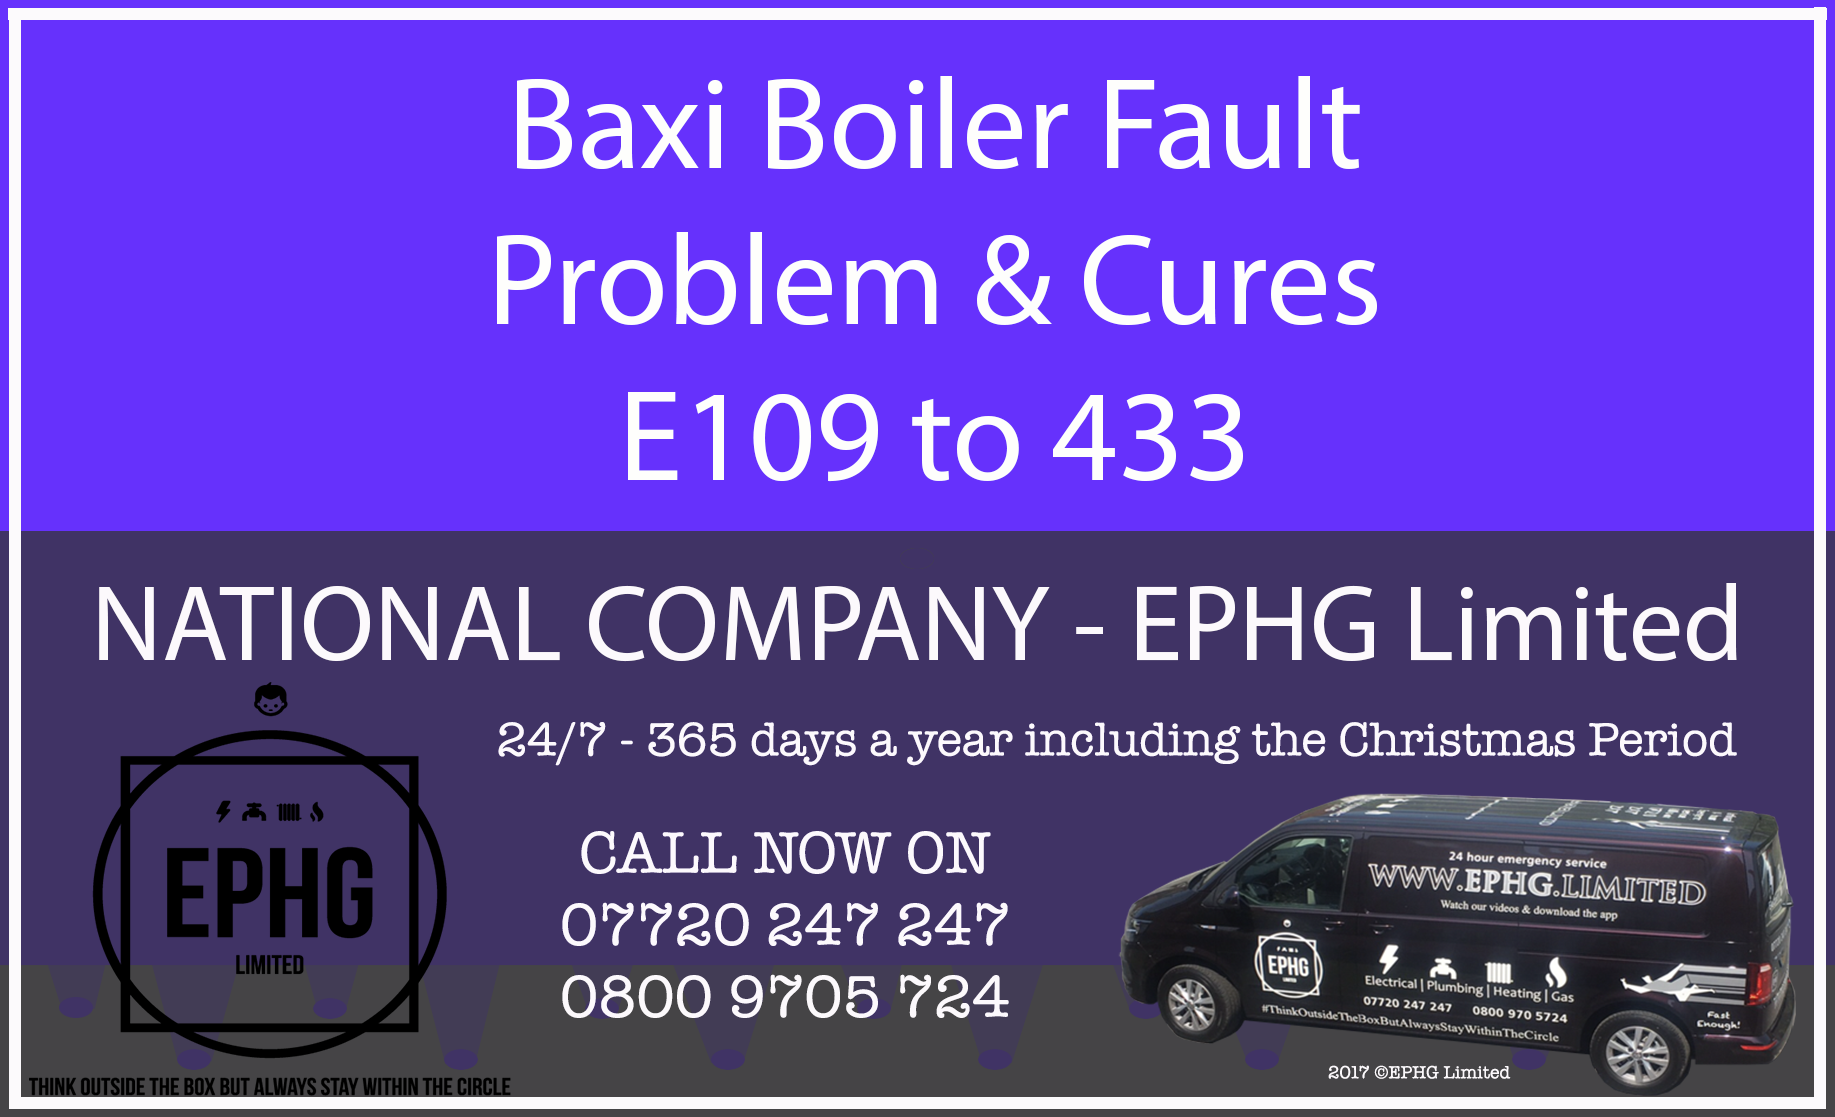 Baxi Boiler Problems And Cures